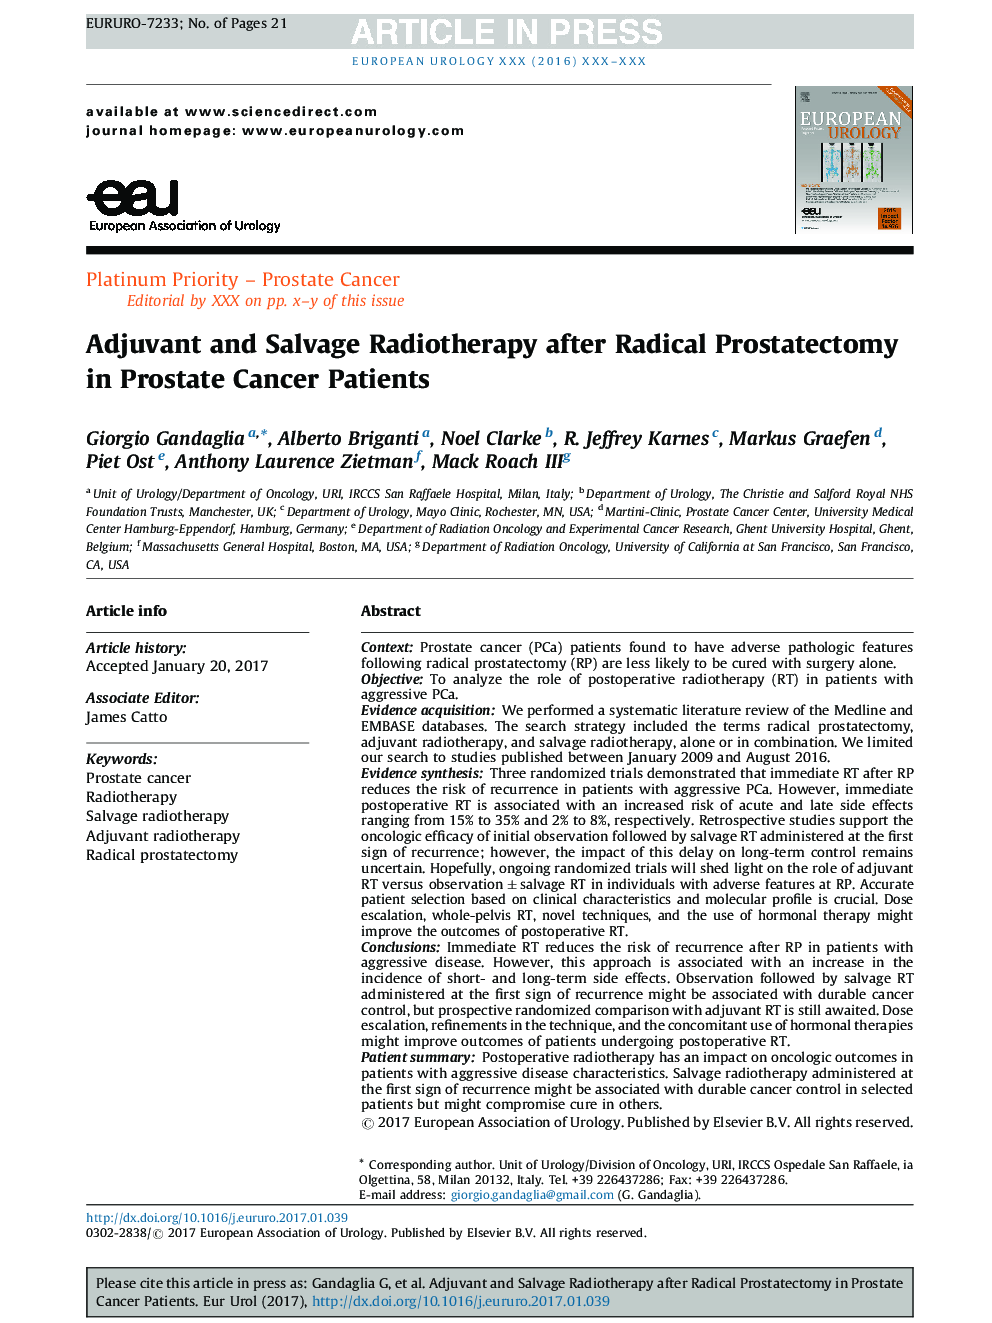 Adjuvant and Salvage Radiotherapy after Radical Prostatectomy in Prostate Cancer Patients